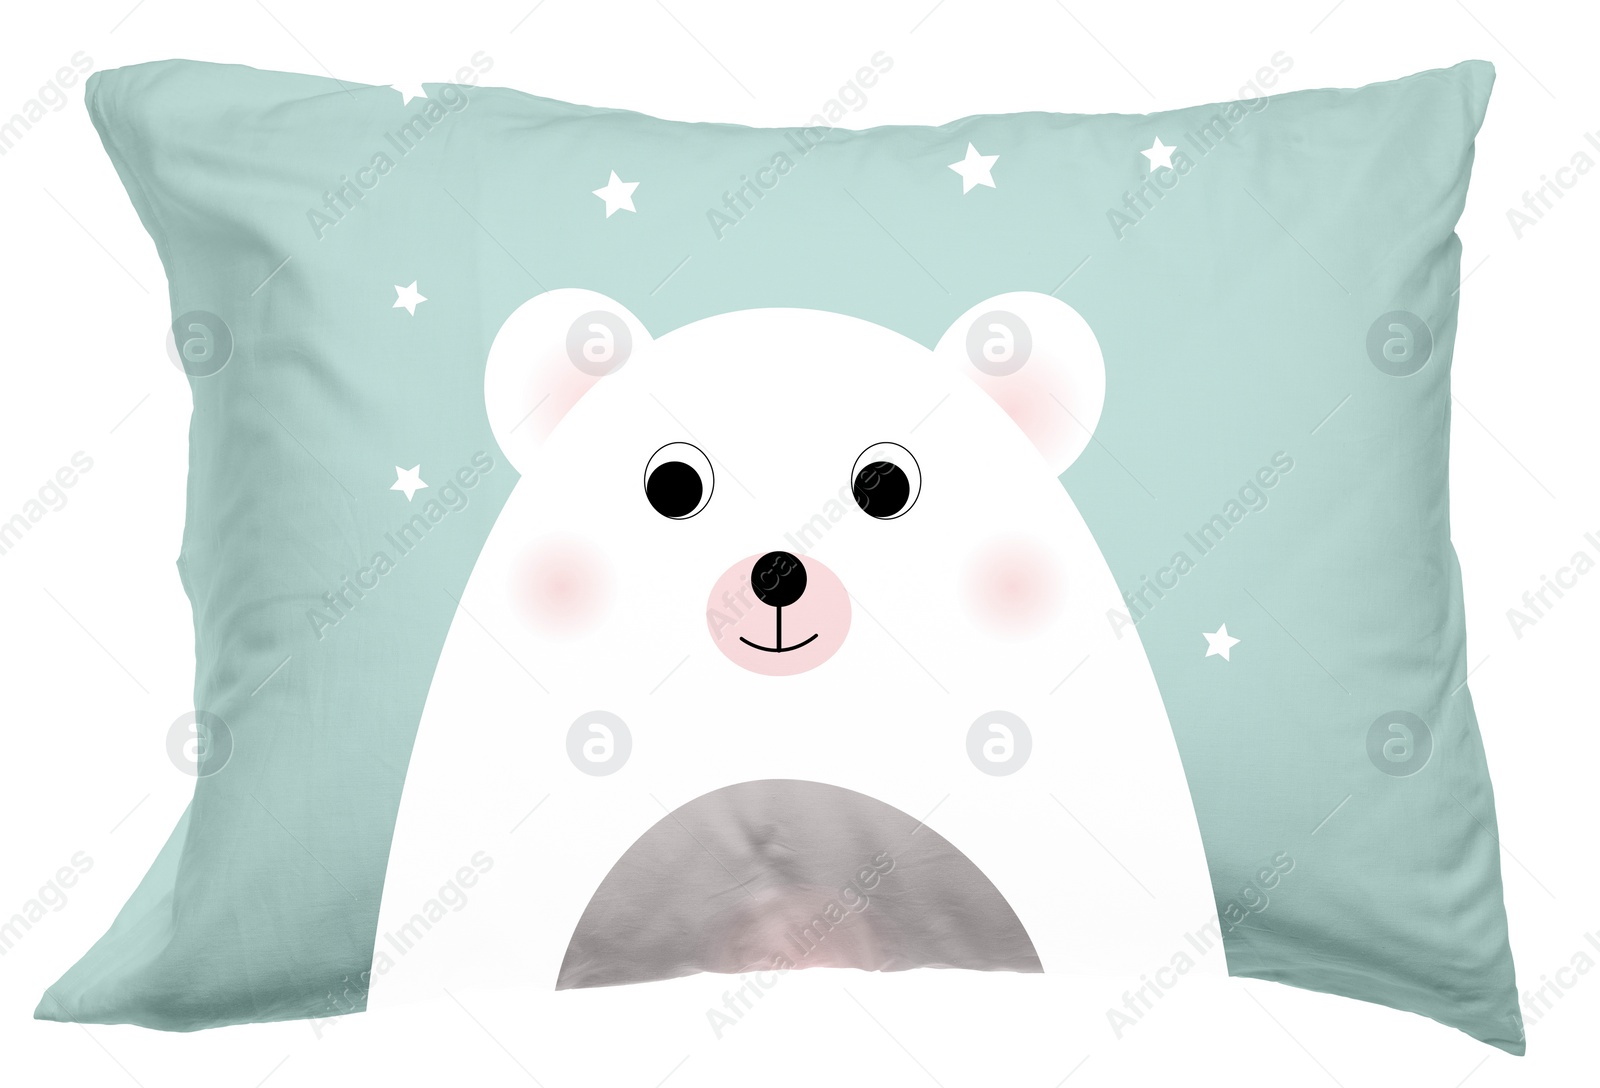 Image of Soft pillow with printed cute bear isolated on white